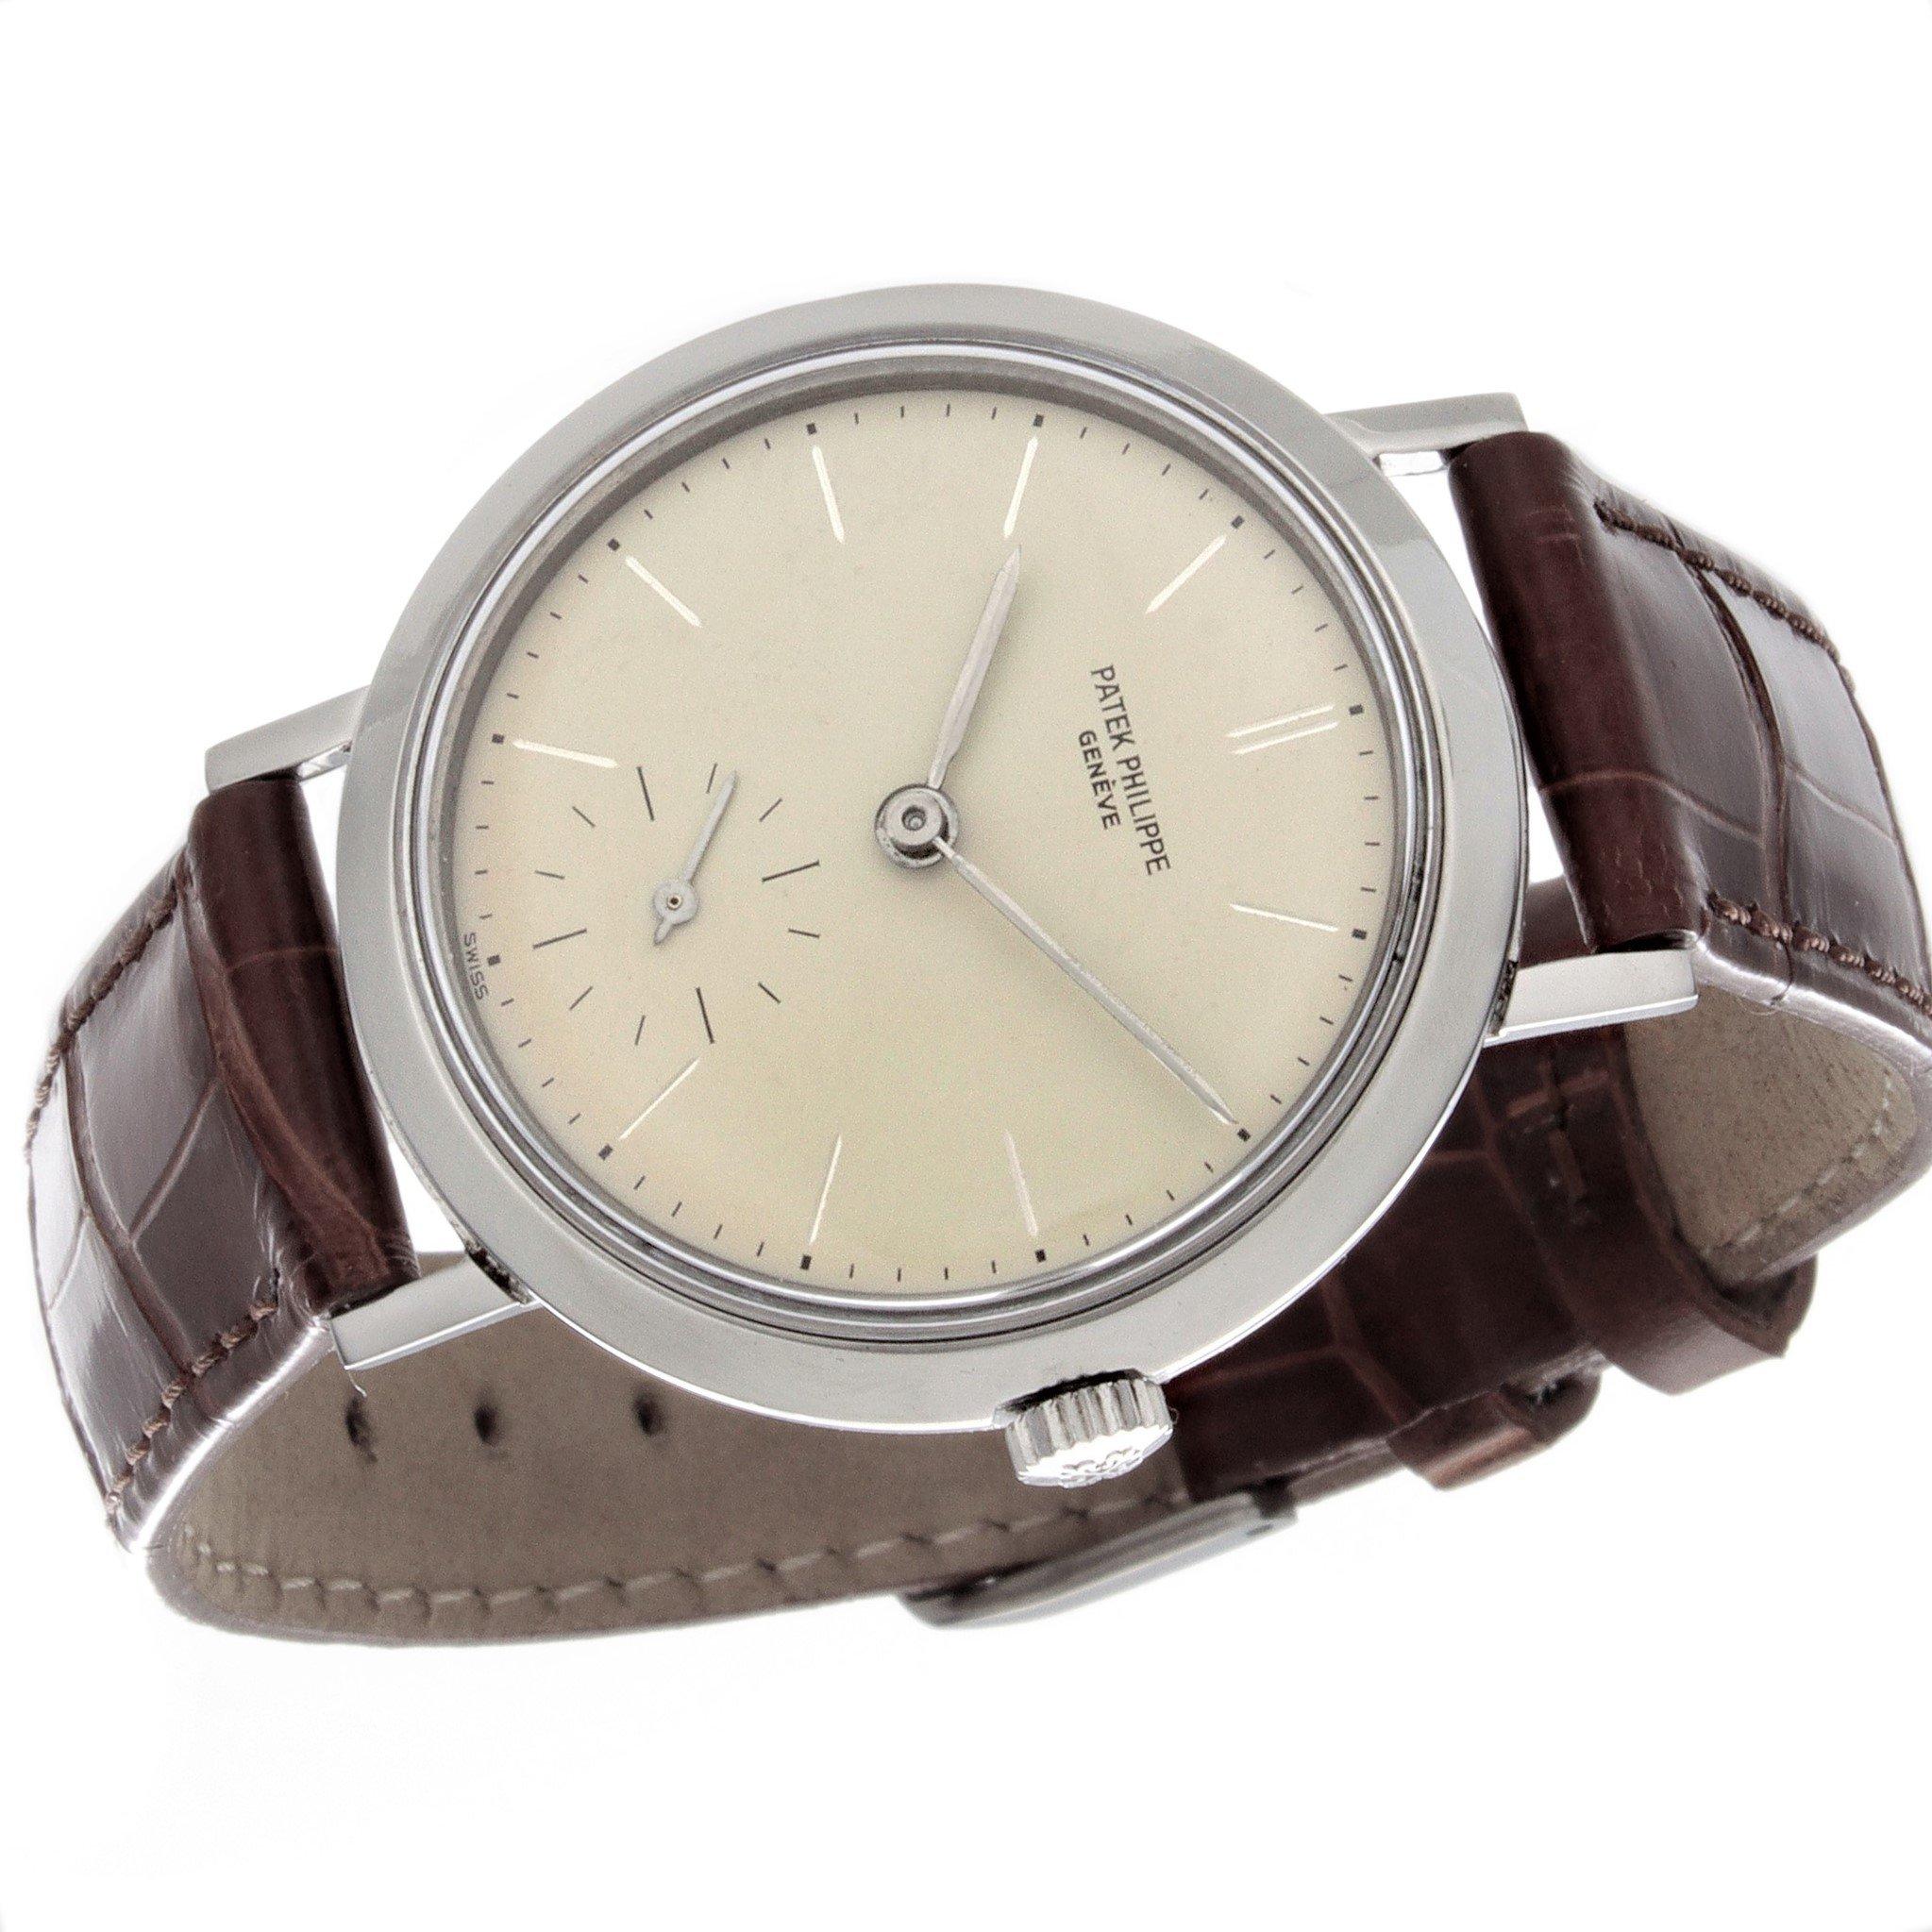 Patek Philippe 3419A Stainless Steel Calatrava Watch For Sale 1